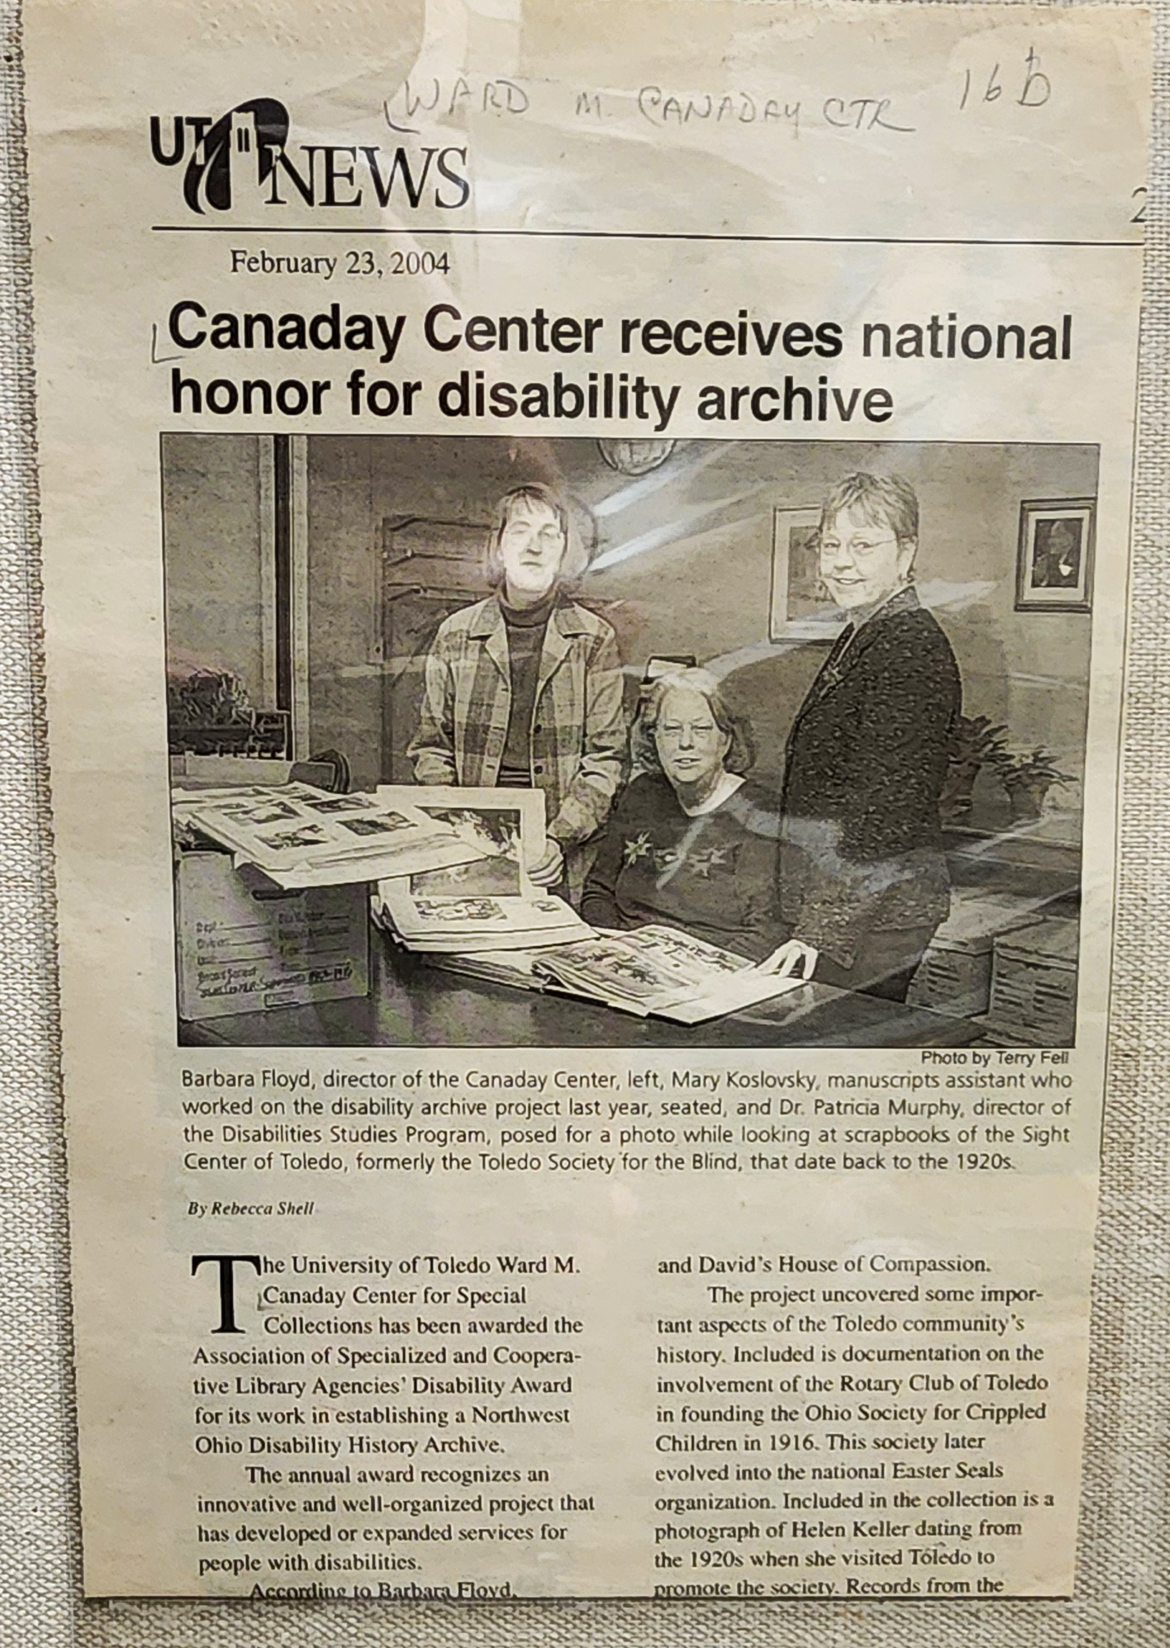 Canaday Center receives national honor for disability archive (UT News, February 23, 2004)